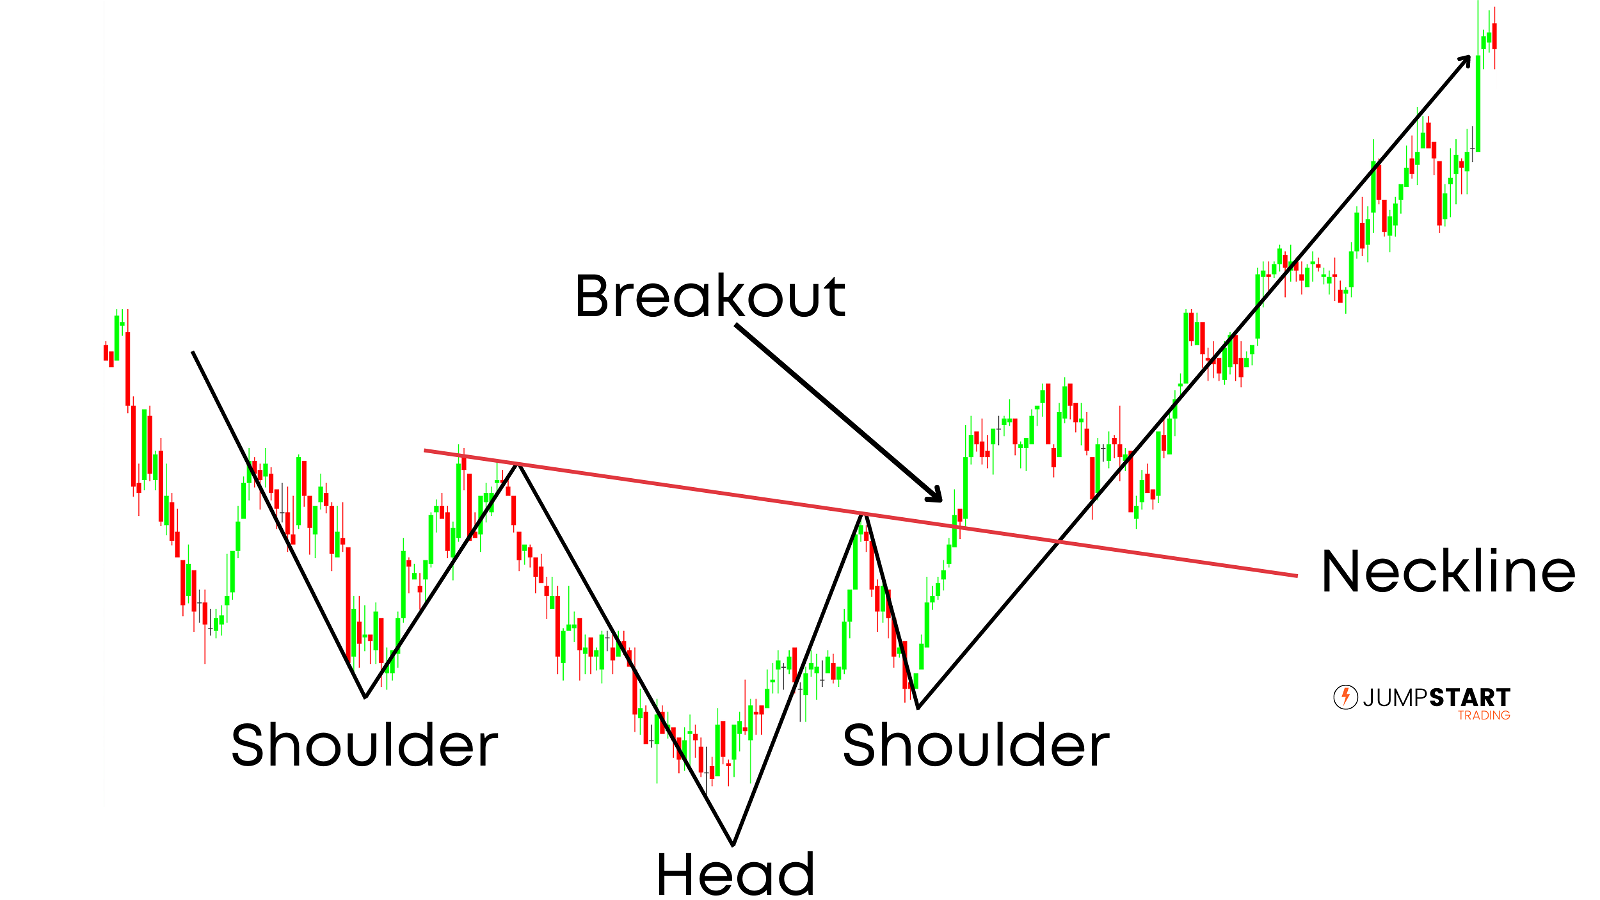 Price forming a bullish head and shoulders structural pattern